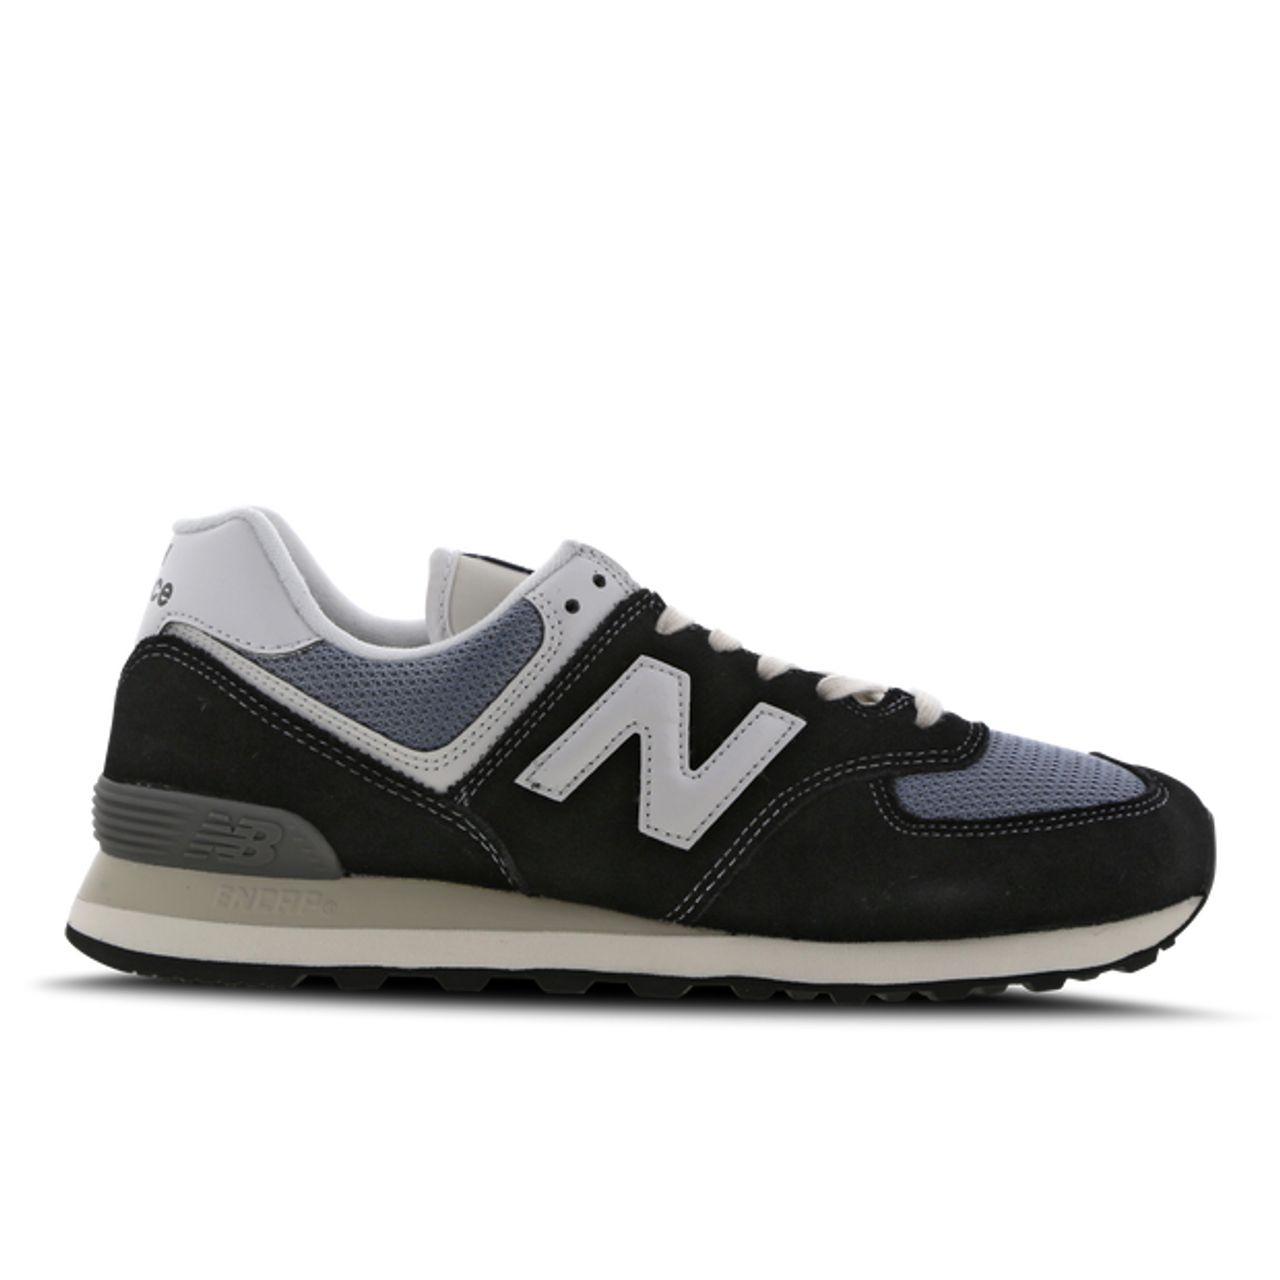 New Balance 574 - Men Shoes ML574HF2 - Compare prices